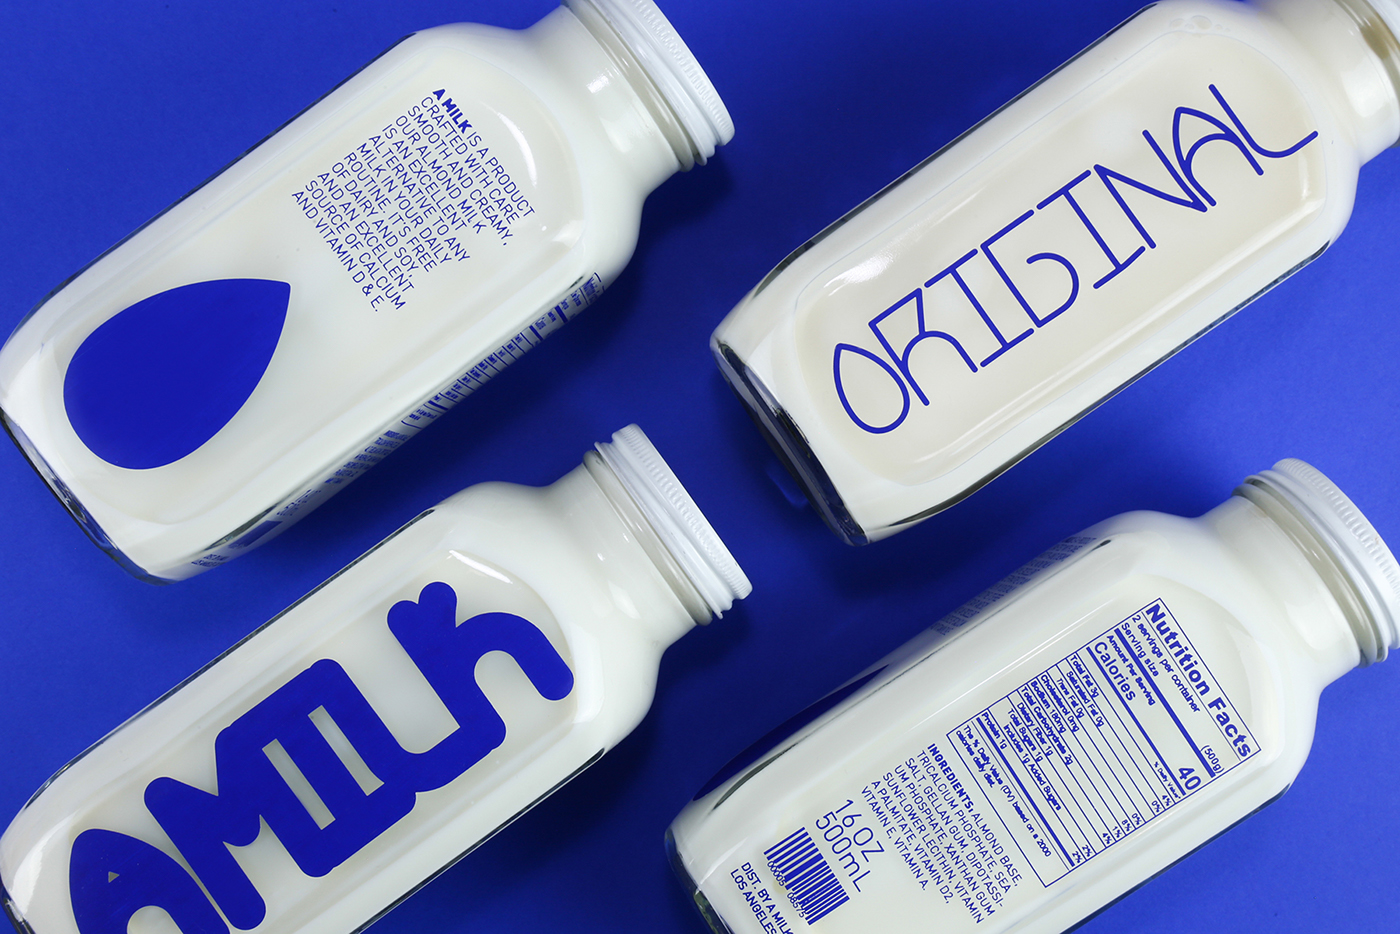 Concept for Almond Milk Drink Branding and Packaging Design